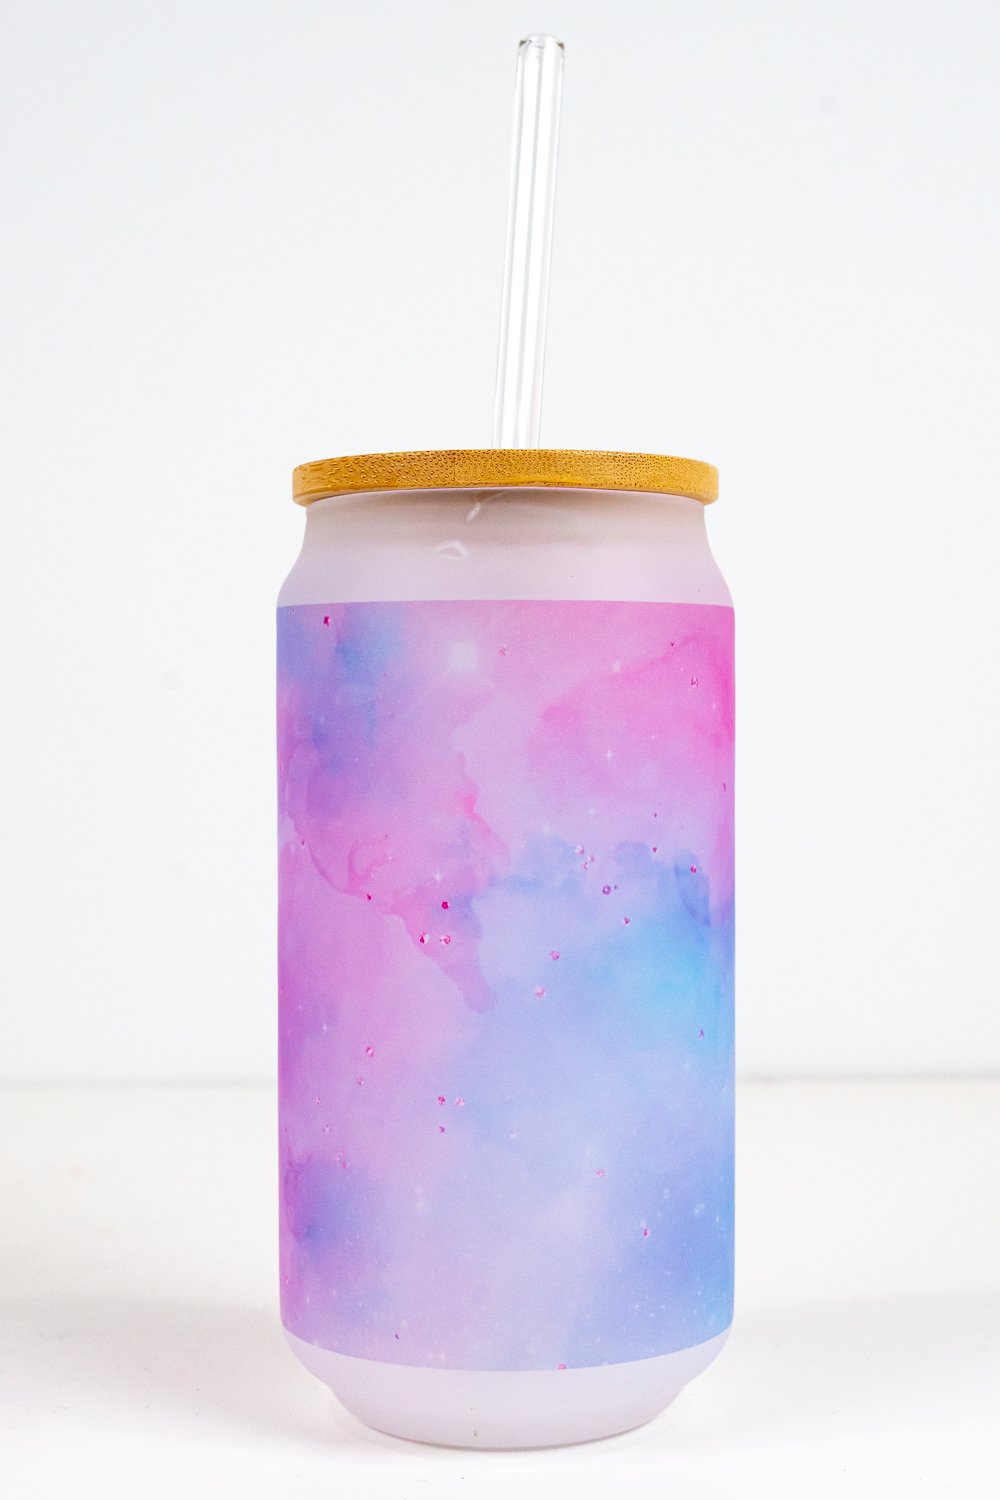 How to Make Glass Sublimation Tumblers and Mugs in a Tumbler Press